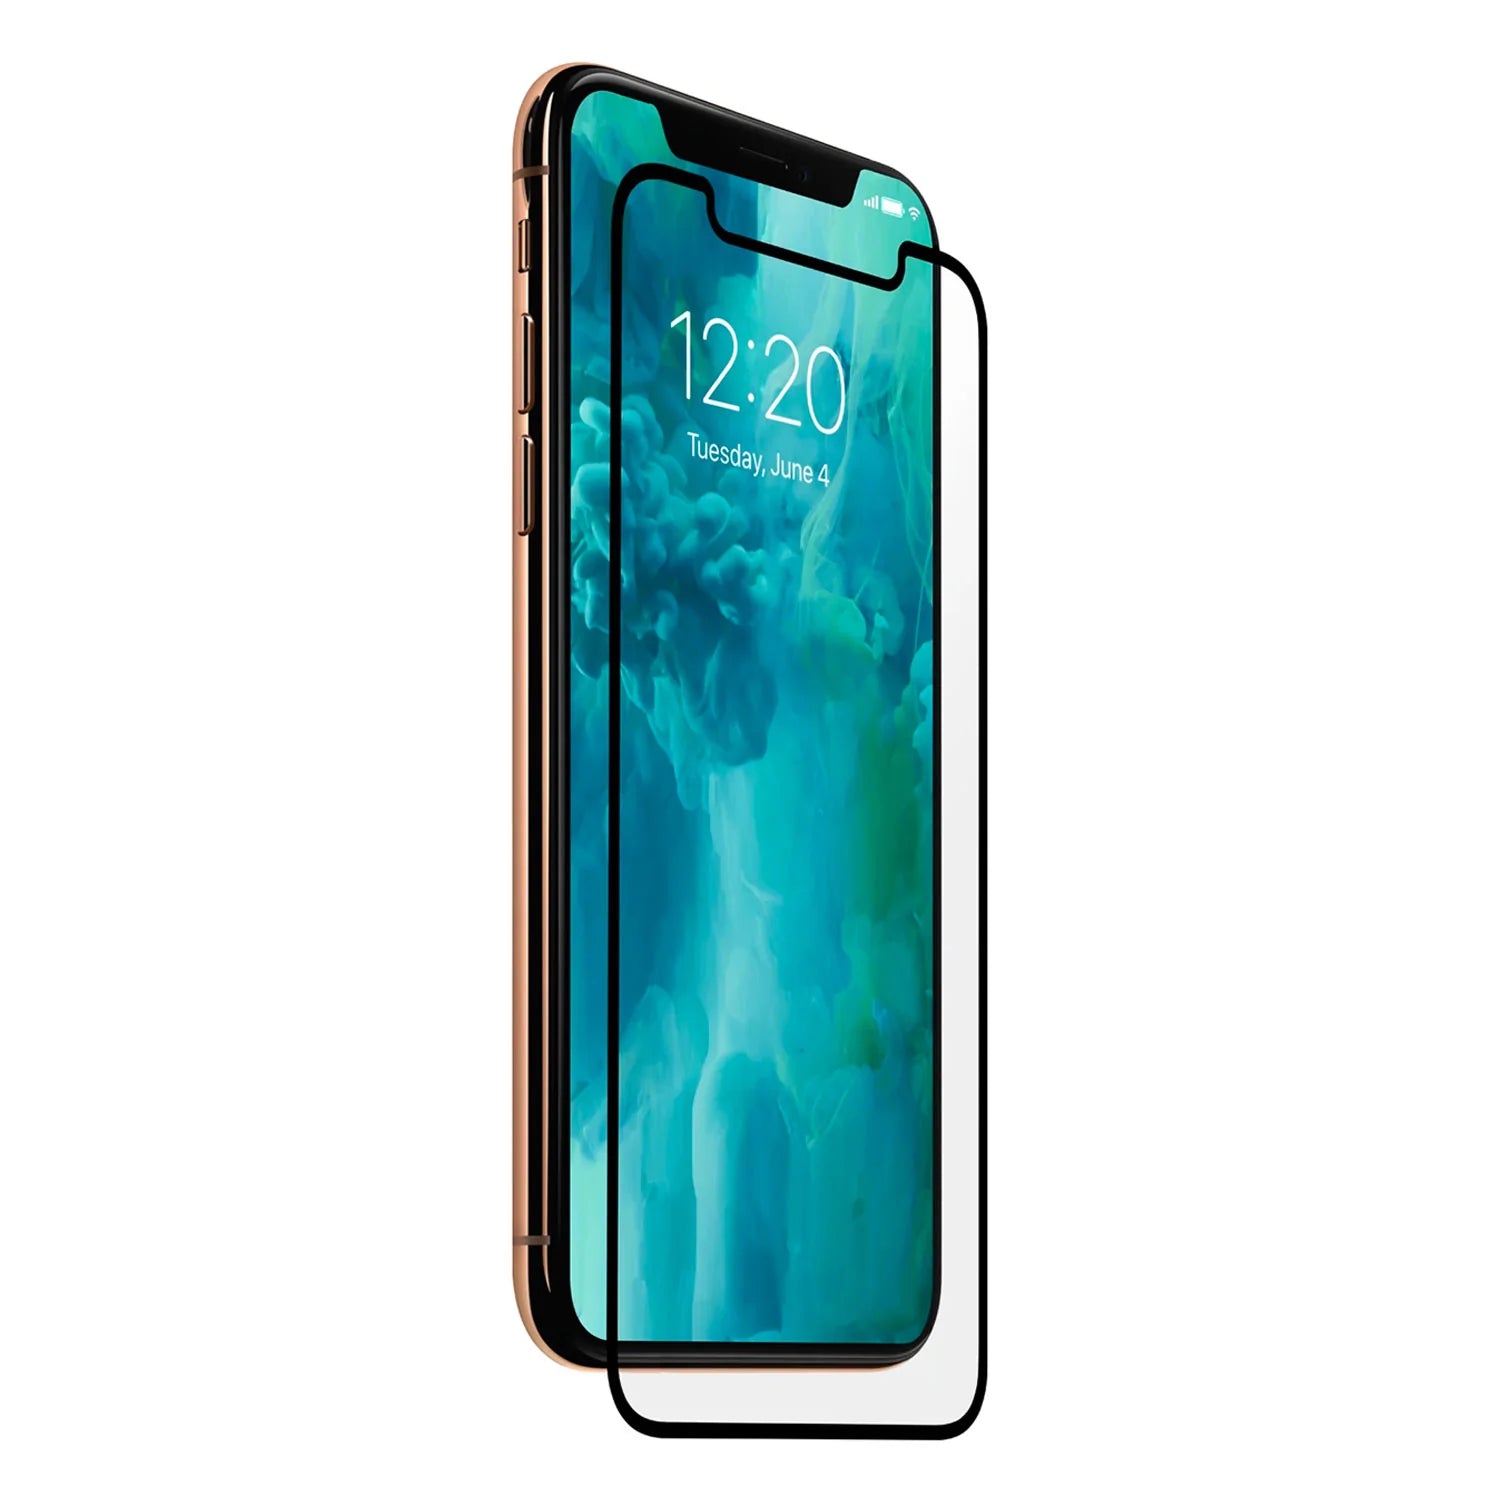 iPhone 11 Pro Max & iPhone Xs Max (6.5 inch) Tempered Glass Screen Protector *Free Shipping*